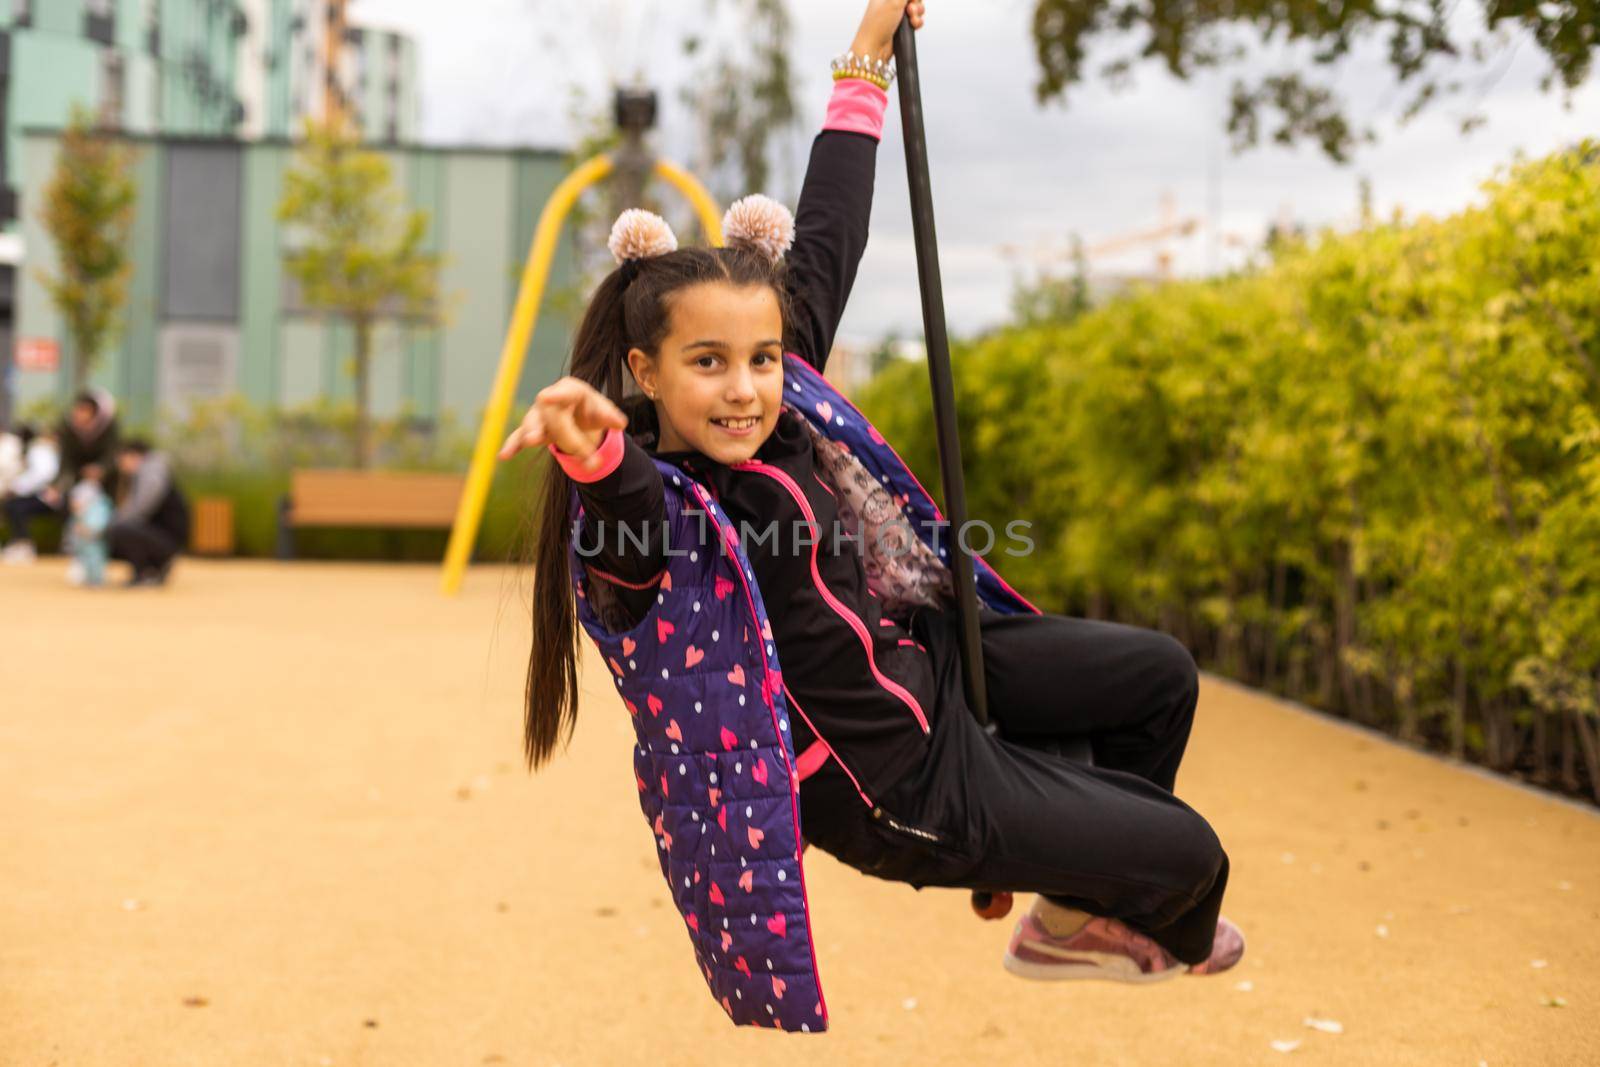 Little girl rides on Flying Fox play equipment. Child girl is smiling in a children's playground